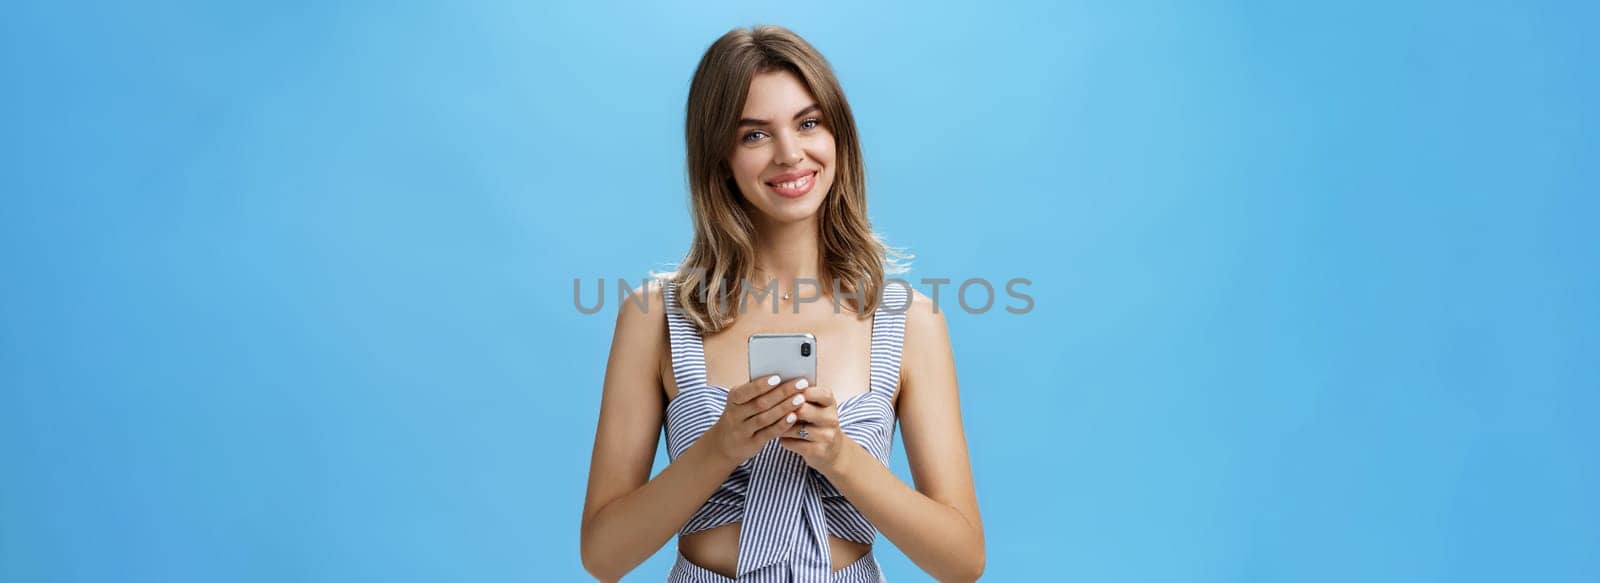 Friendly pleasant good-looking woman in matching outfit holding smartphone over chest tilting head smiling broadly showing cute gapped teeth being delighted after reading heartwarming message by Benzoix